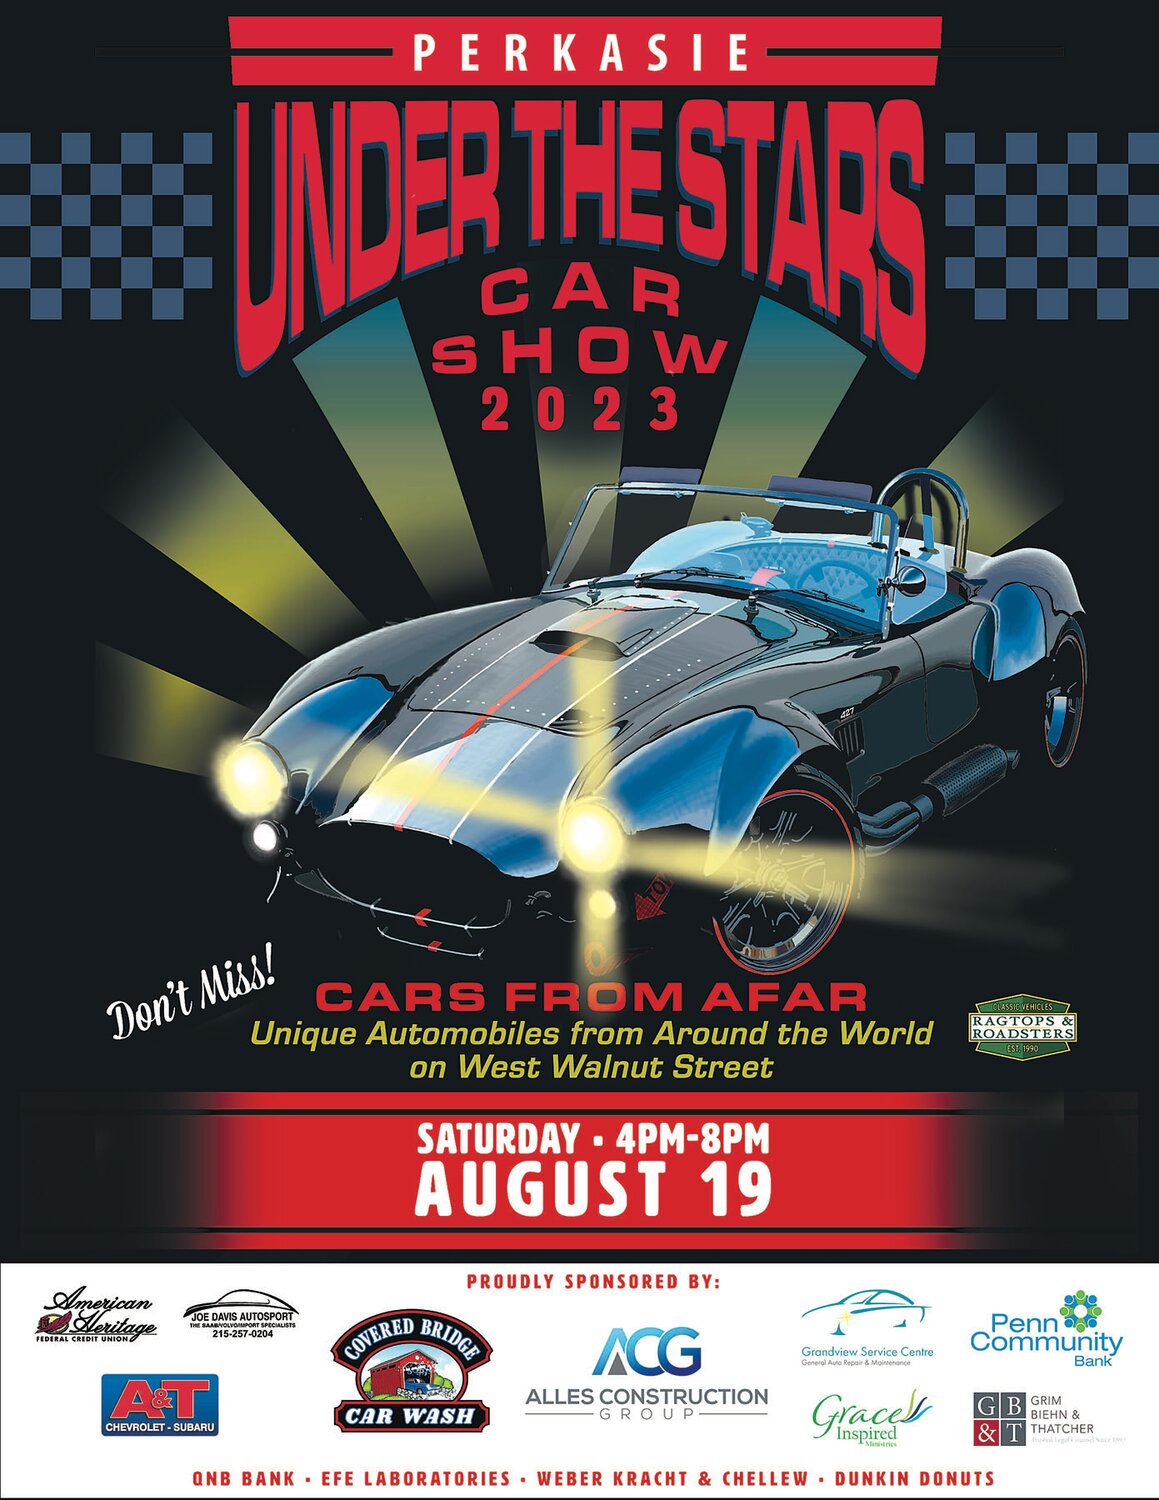 “Under the Stars Car Show” returns to Perkasie with firstever “Cars